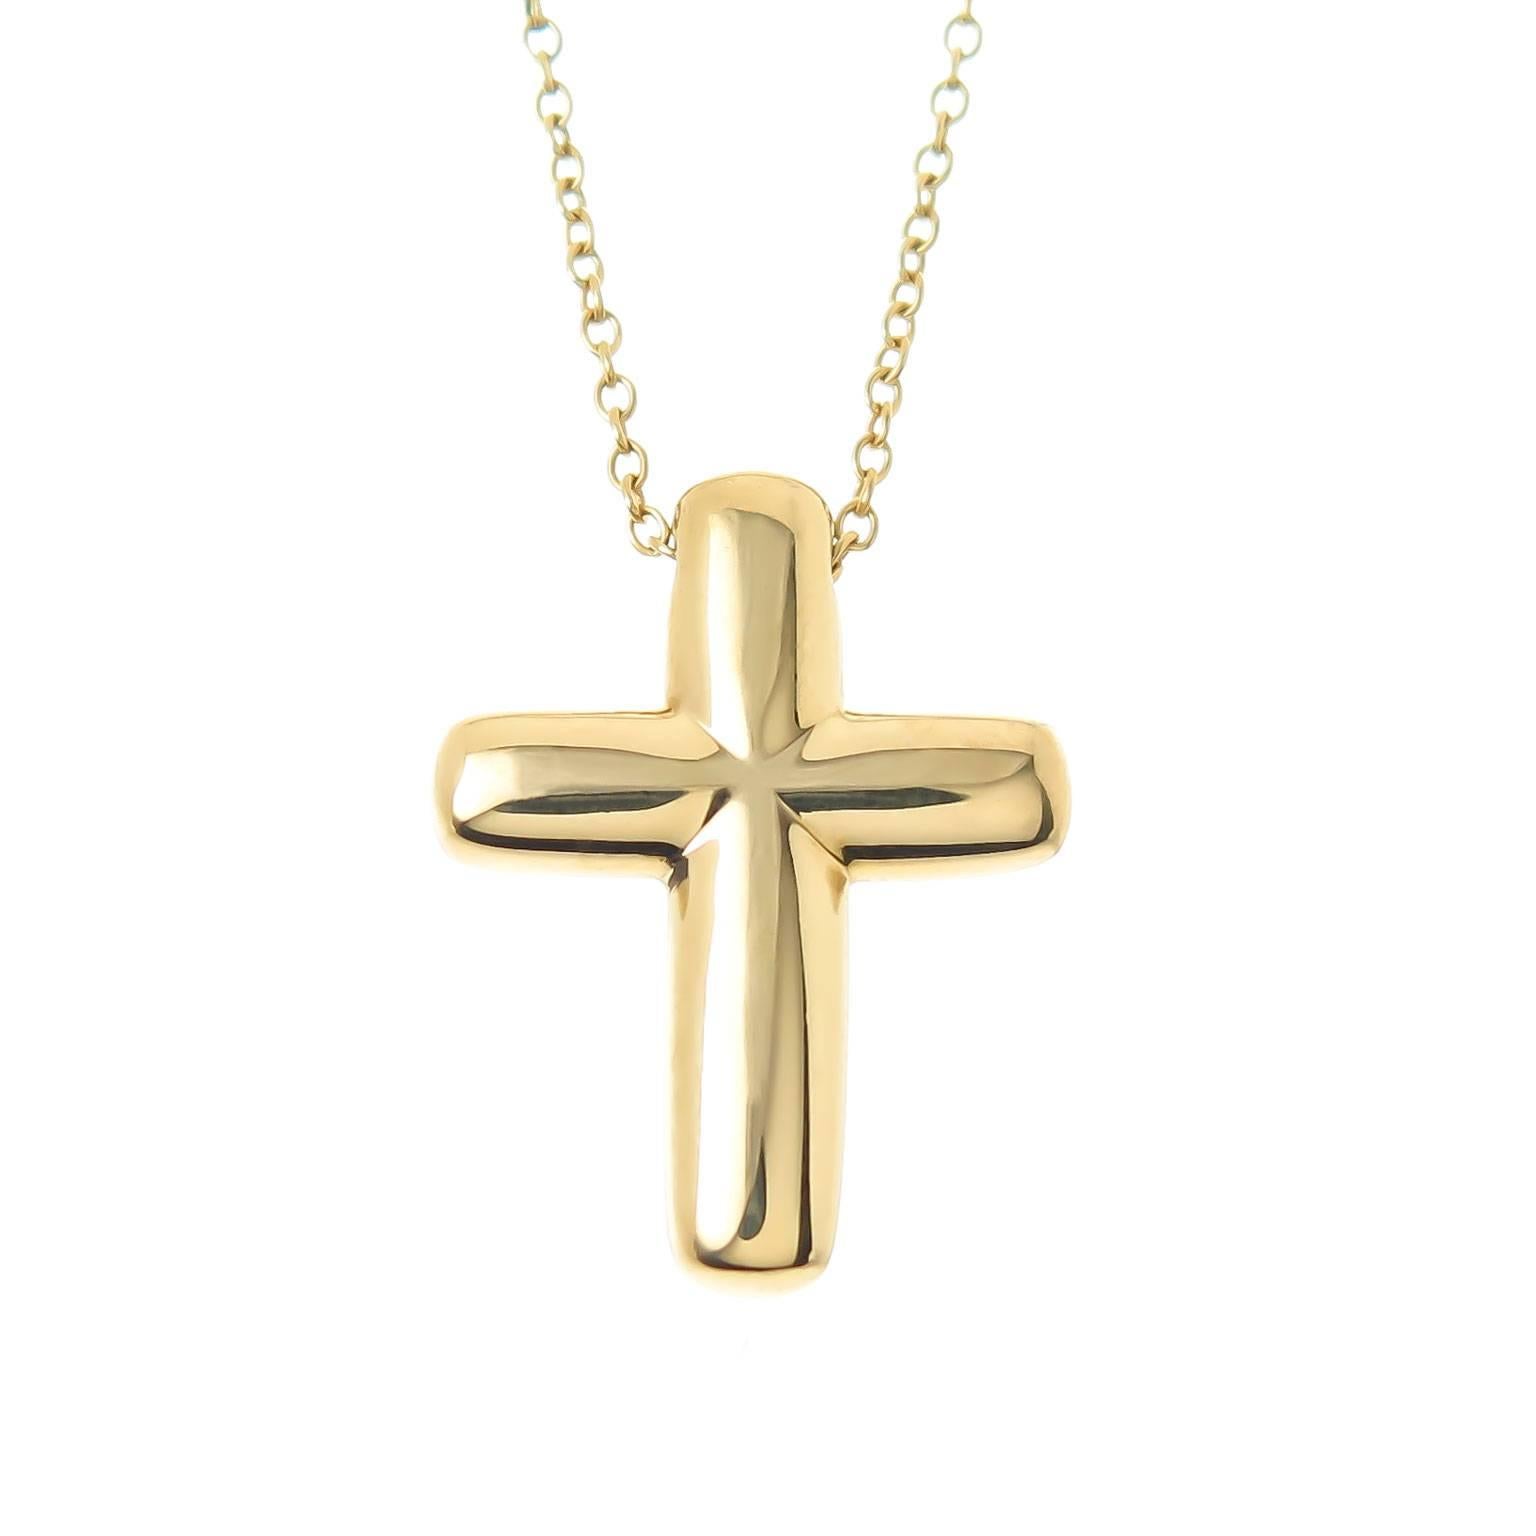 Circa 2010 Tiffany & Co 18k yellow Gold Cross, measuring 3/4 inch in length and  5/8 inch wide. Set with 4 Round Brilliant cut Diamonds totaling .10 Carat. Suspended from an 18 inch Yellow Gold Tiffany Chain. Comes in the original Tiffany Suede